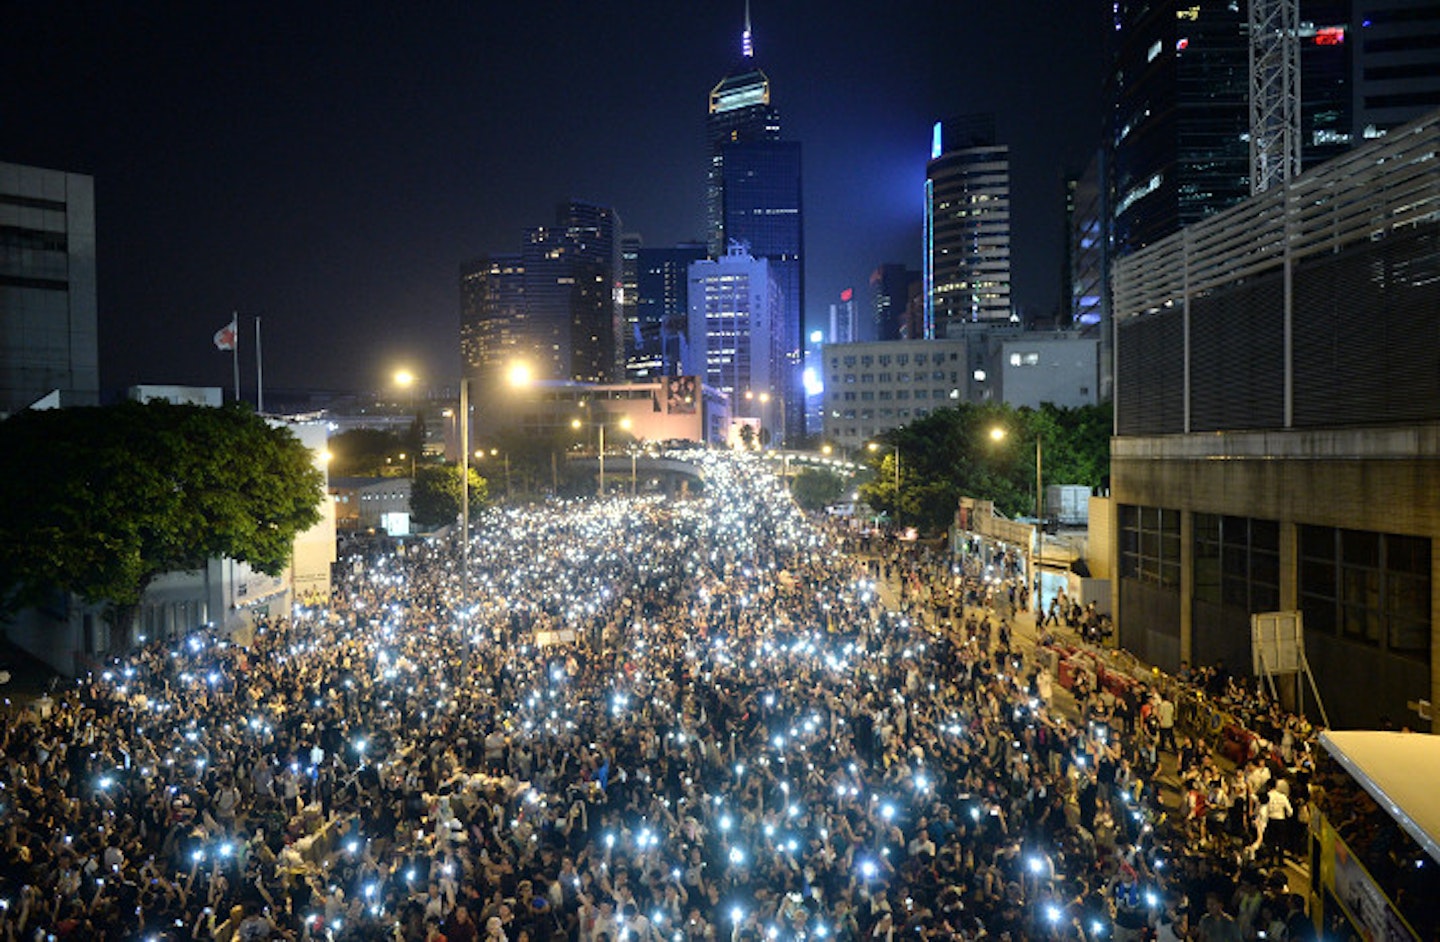 Pro-democracy demonstrators hold up their mobile phones during a protest near the Hong Kong government headquarters on September 29, 2014